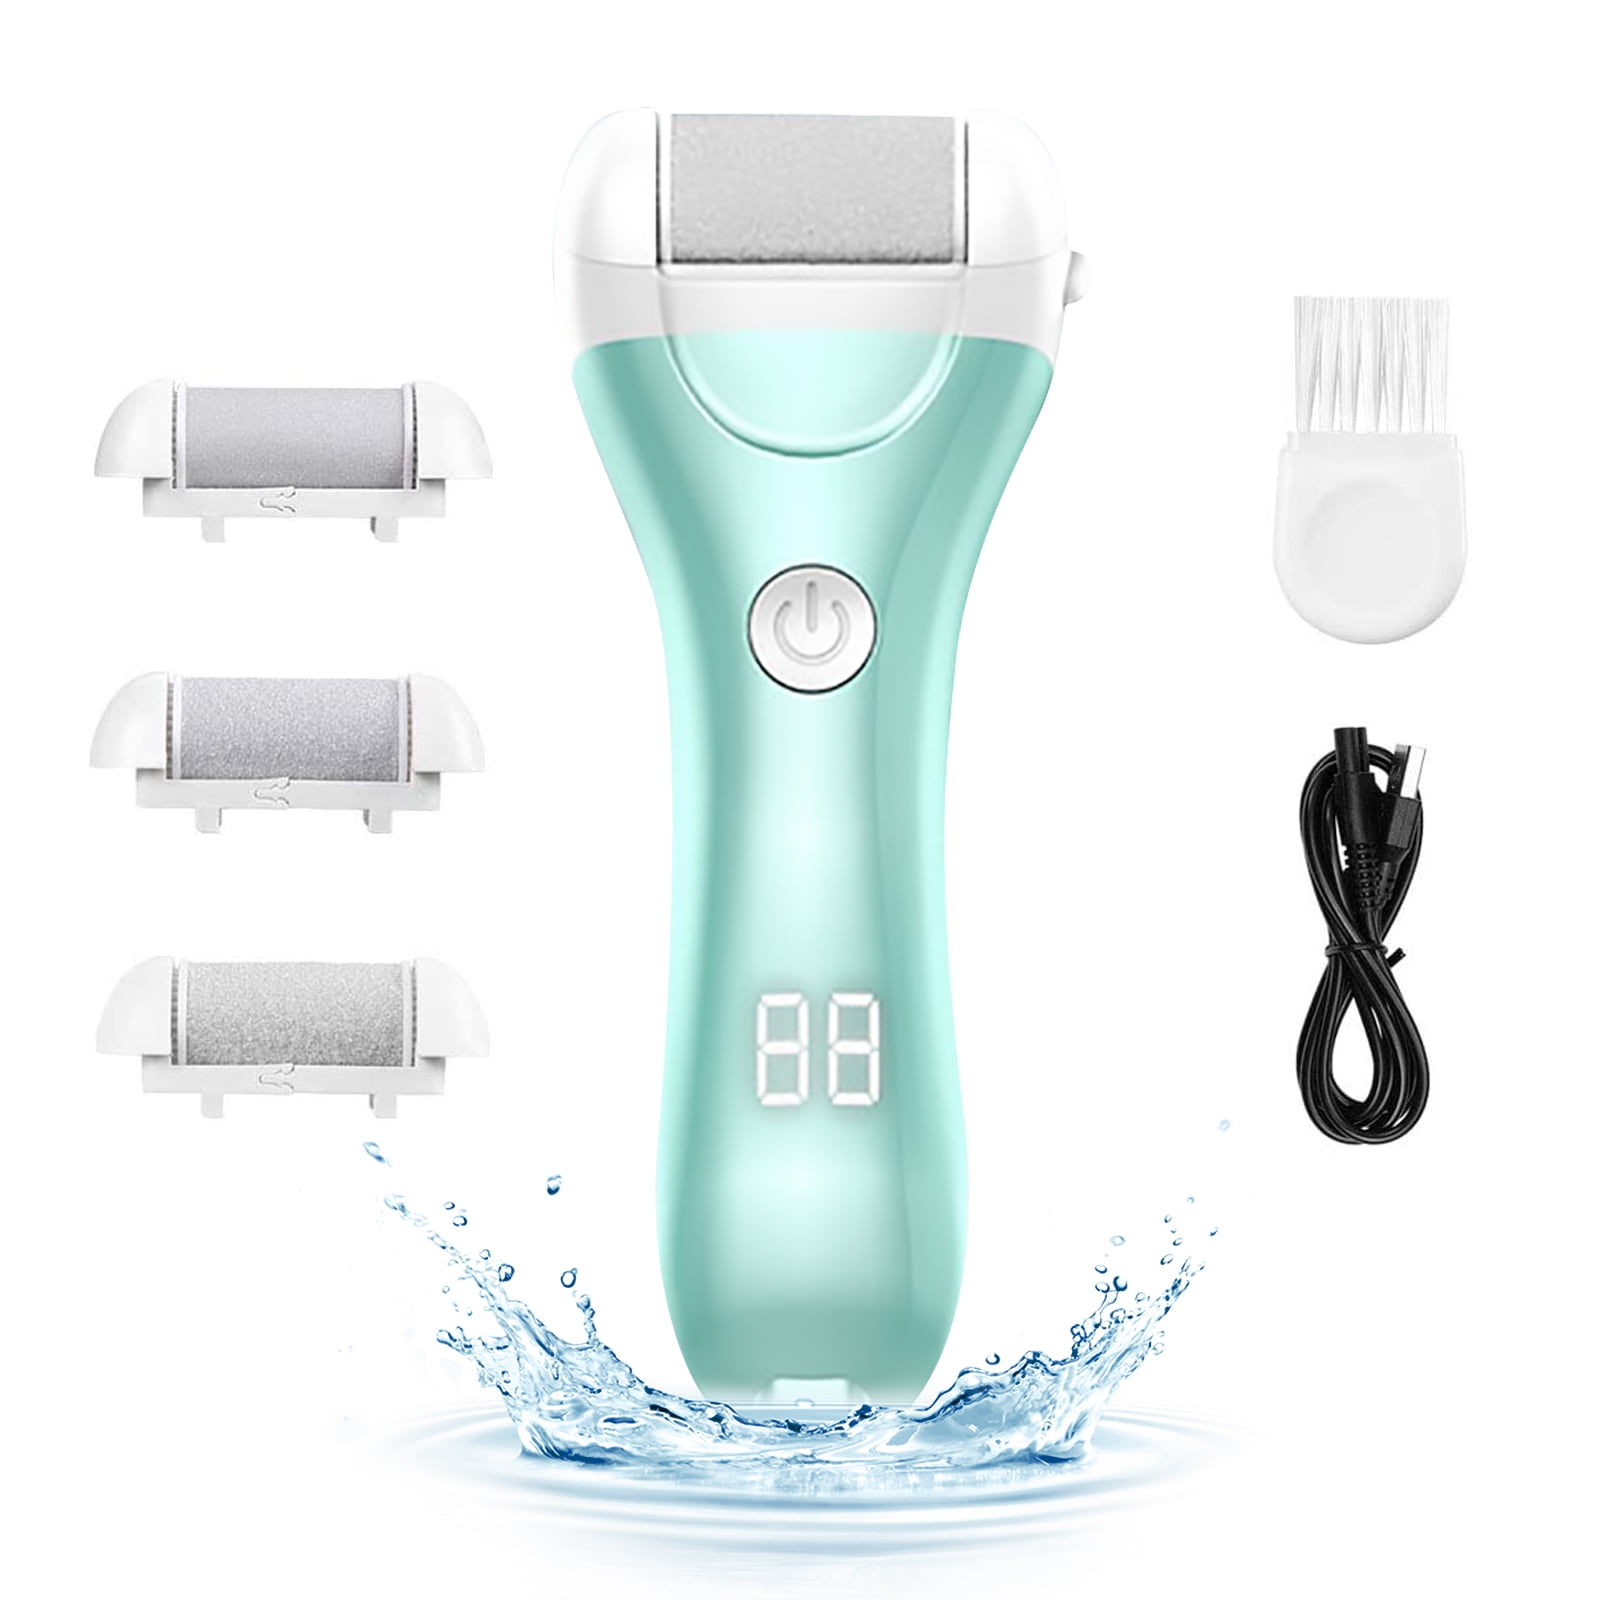 Electric Foot File Callus Remover for Feet, Rechargeable Pedicure Kit Foot  Care with 3 Speed, Callus Remover Kit with 3 Roller Heads, Battery LCD  Display for Remove Cracked Heels Calluses&Hard Skin 3